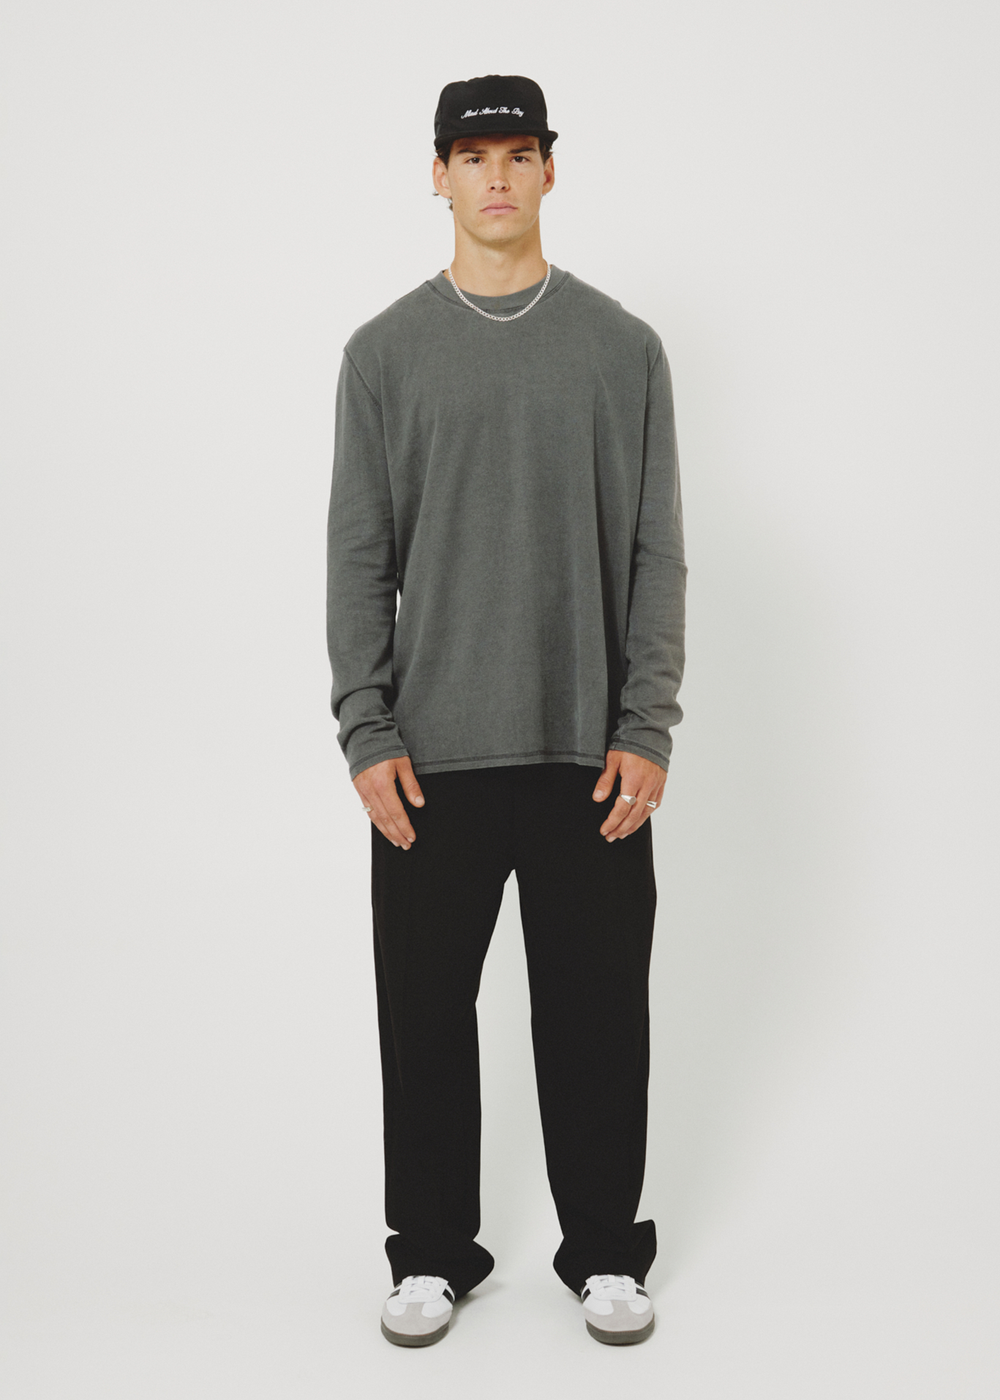 Commoners Hemp Jersey LS - Vintage Grey | COMMONERS | Mad About The Boy